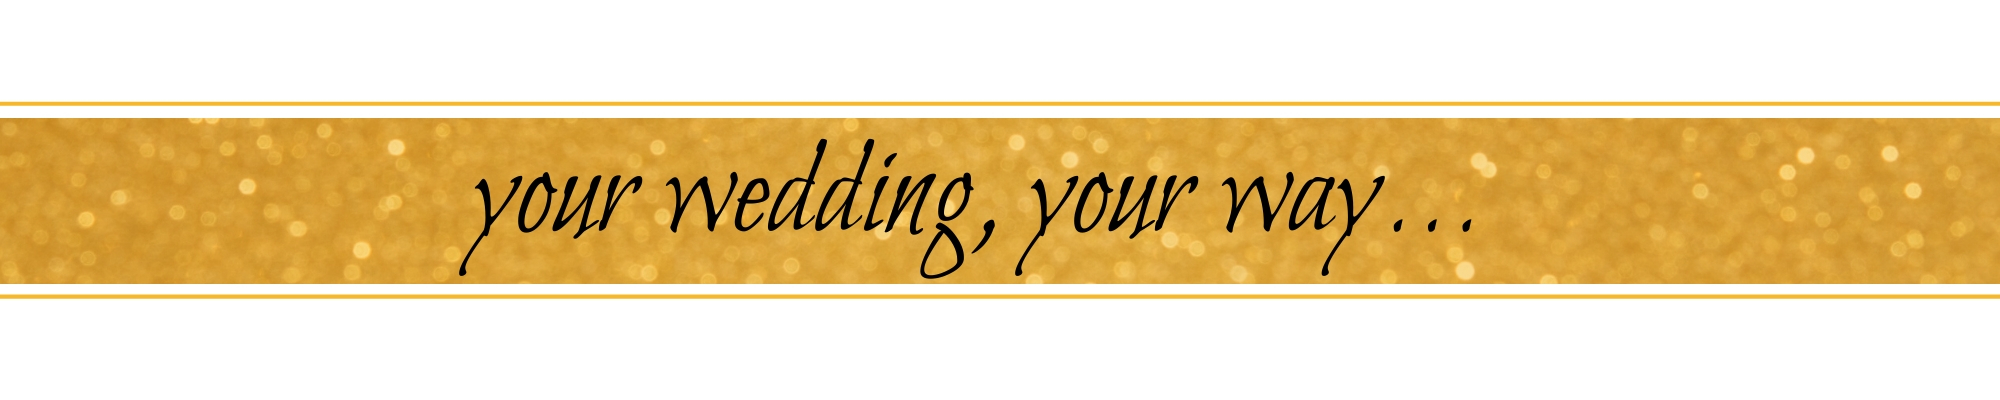 your wedding, your way